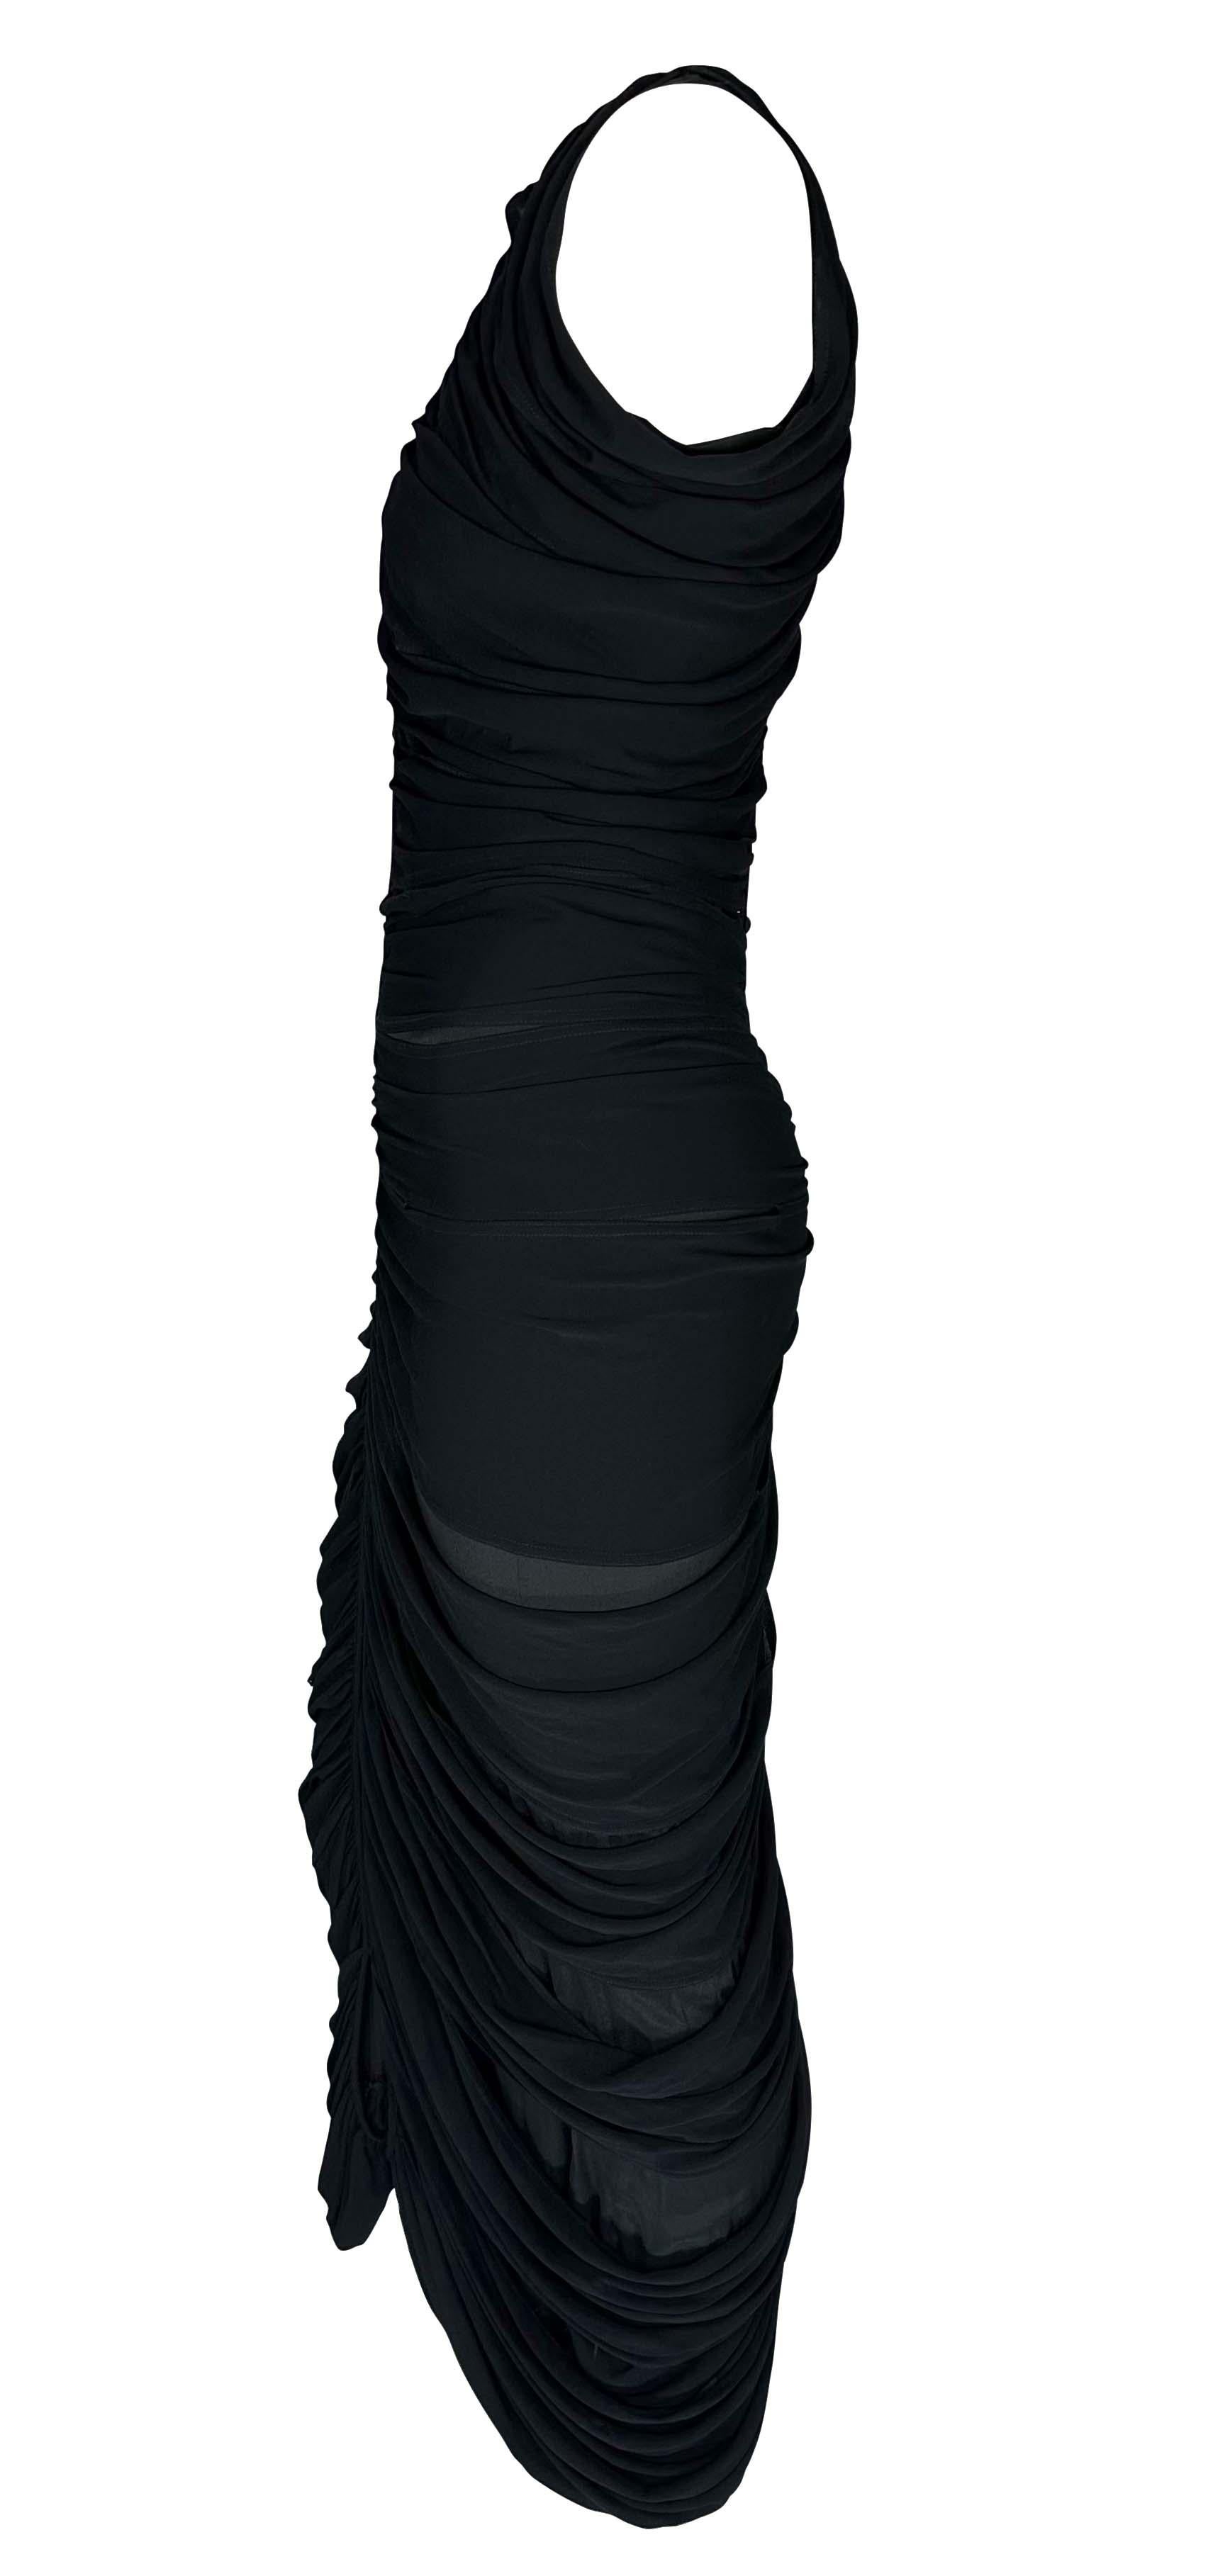 Women's S/S 2001 Yves Saint Laurent by Tom Ford Draped Bodycon Black Viscose Dress For Sale